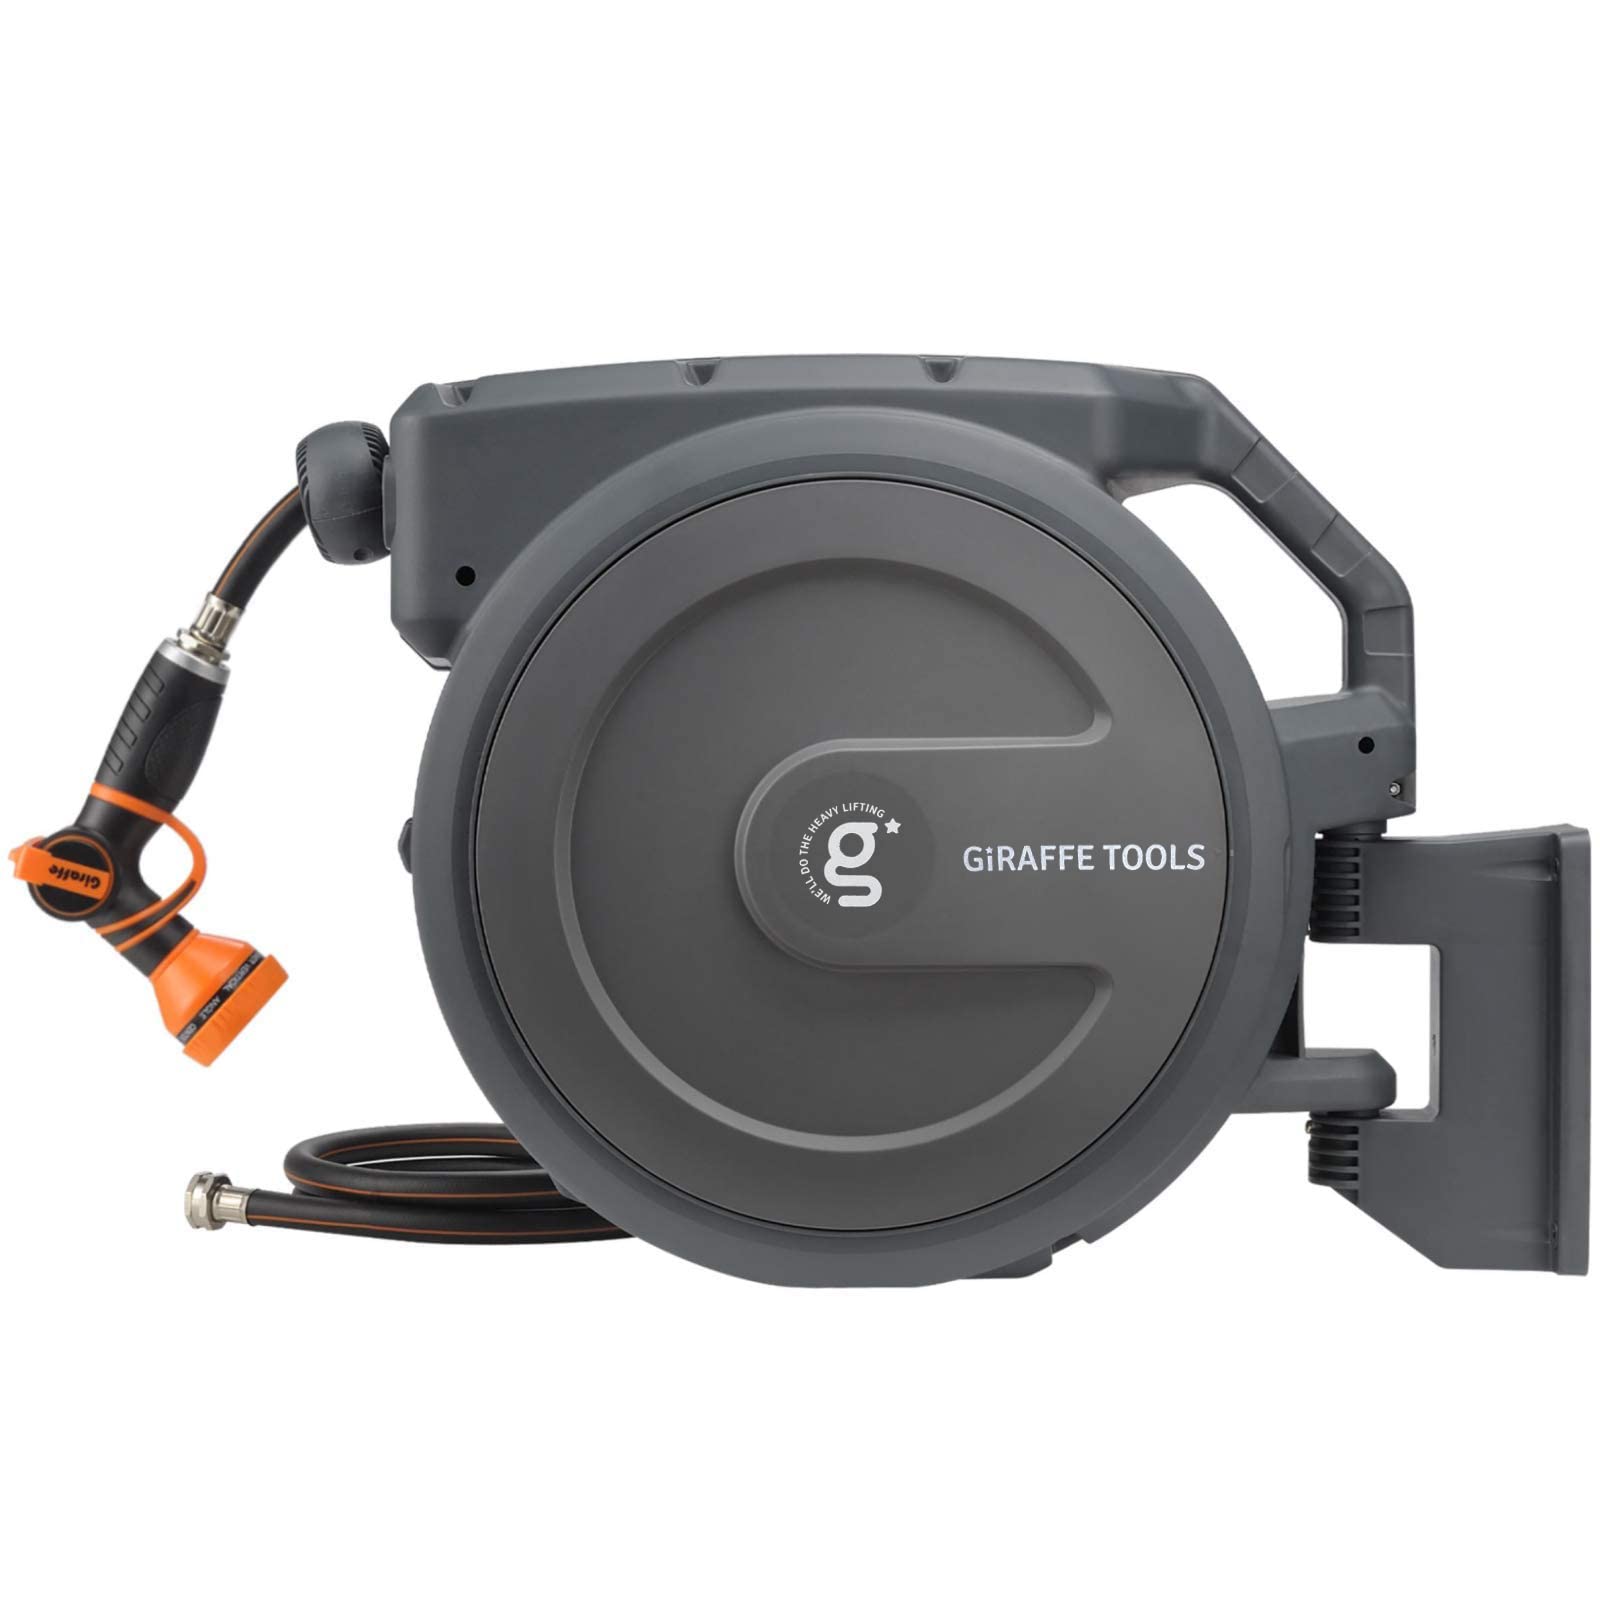 Score 19% Off on the Giraffe Tools AW30 Retractable Garden Hose Reel: Say  Goodbye to Tangled Hoses!